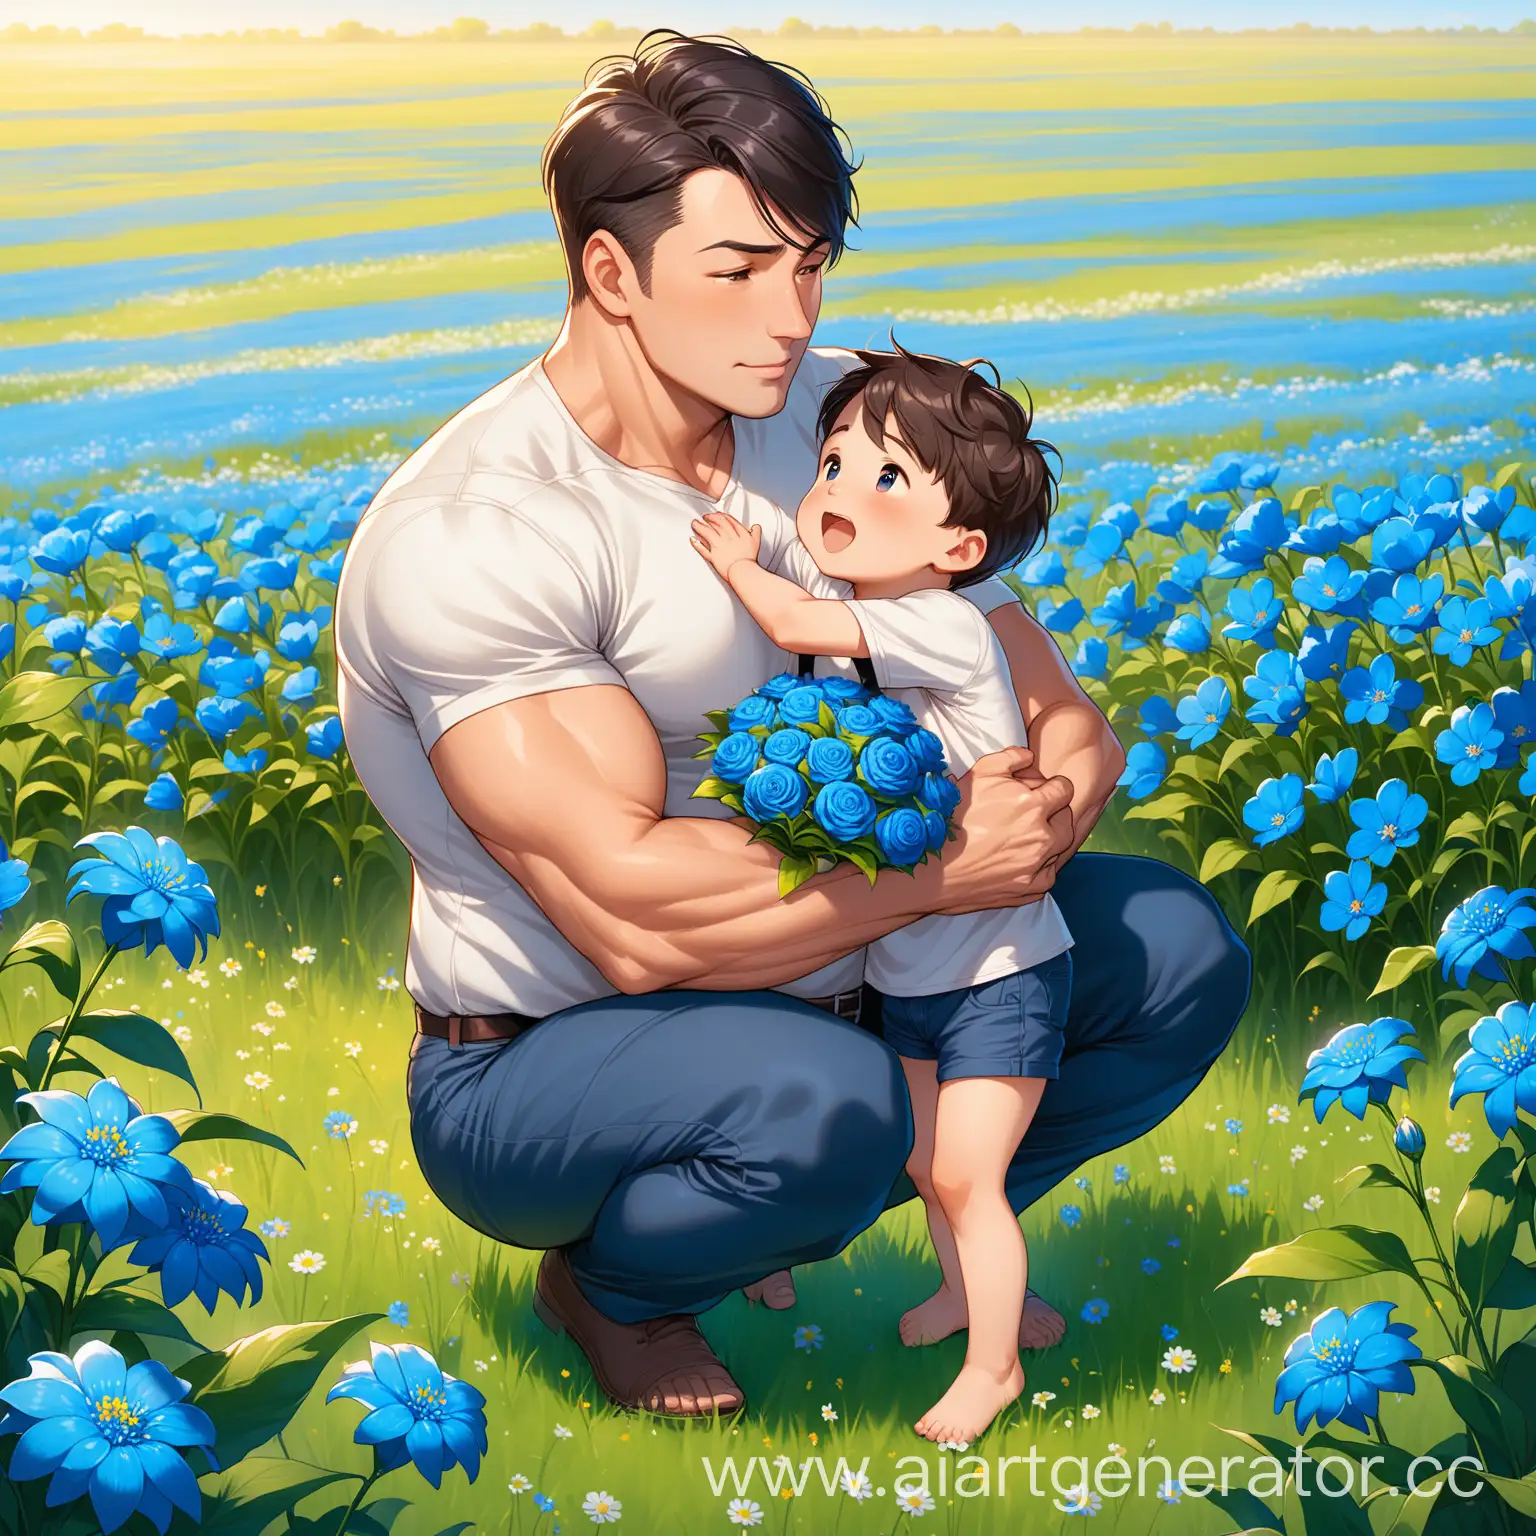 Dad has a fit body, black hair. Son is brown-haired. Dad has a massive chin. Dad has short hair. The son gives his dad a bouquet of blue flowers in a field. The father is squatting and wants to hug his son.  The son looks at his father.